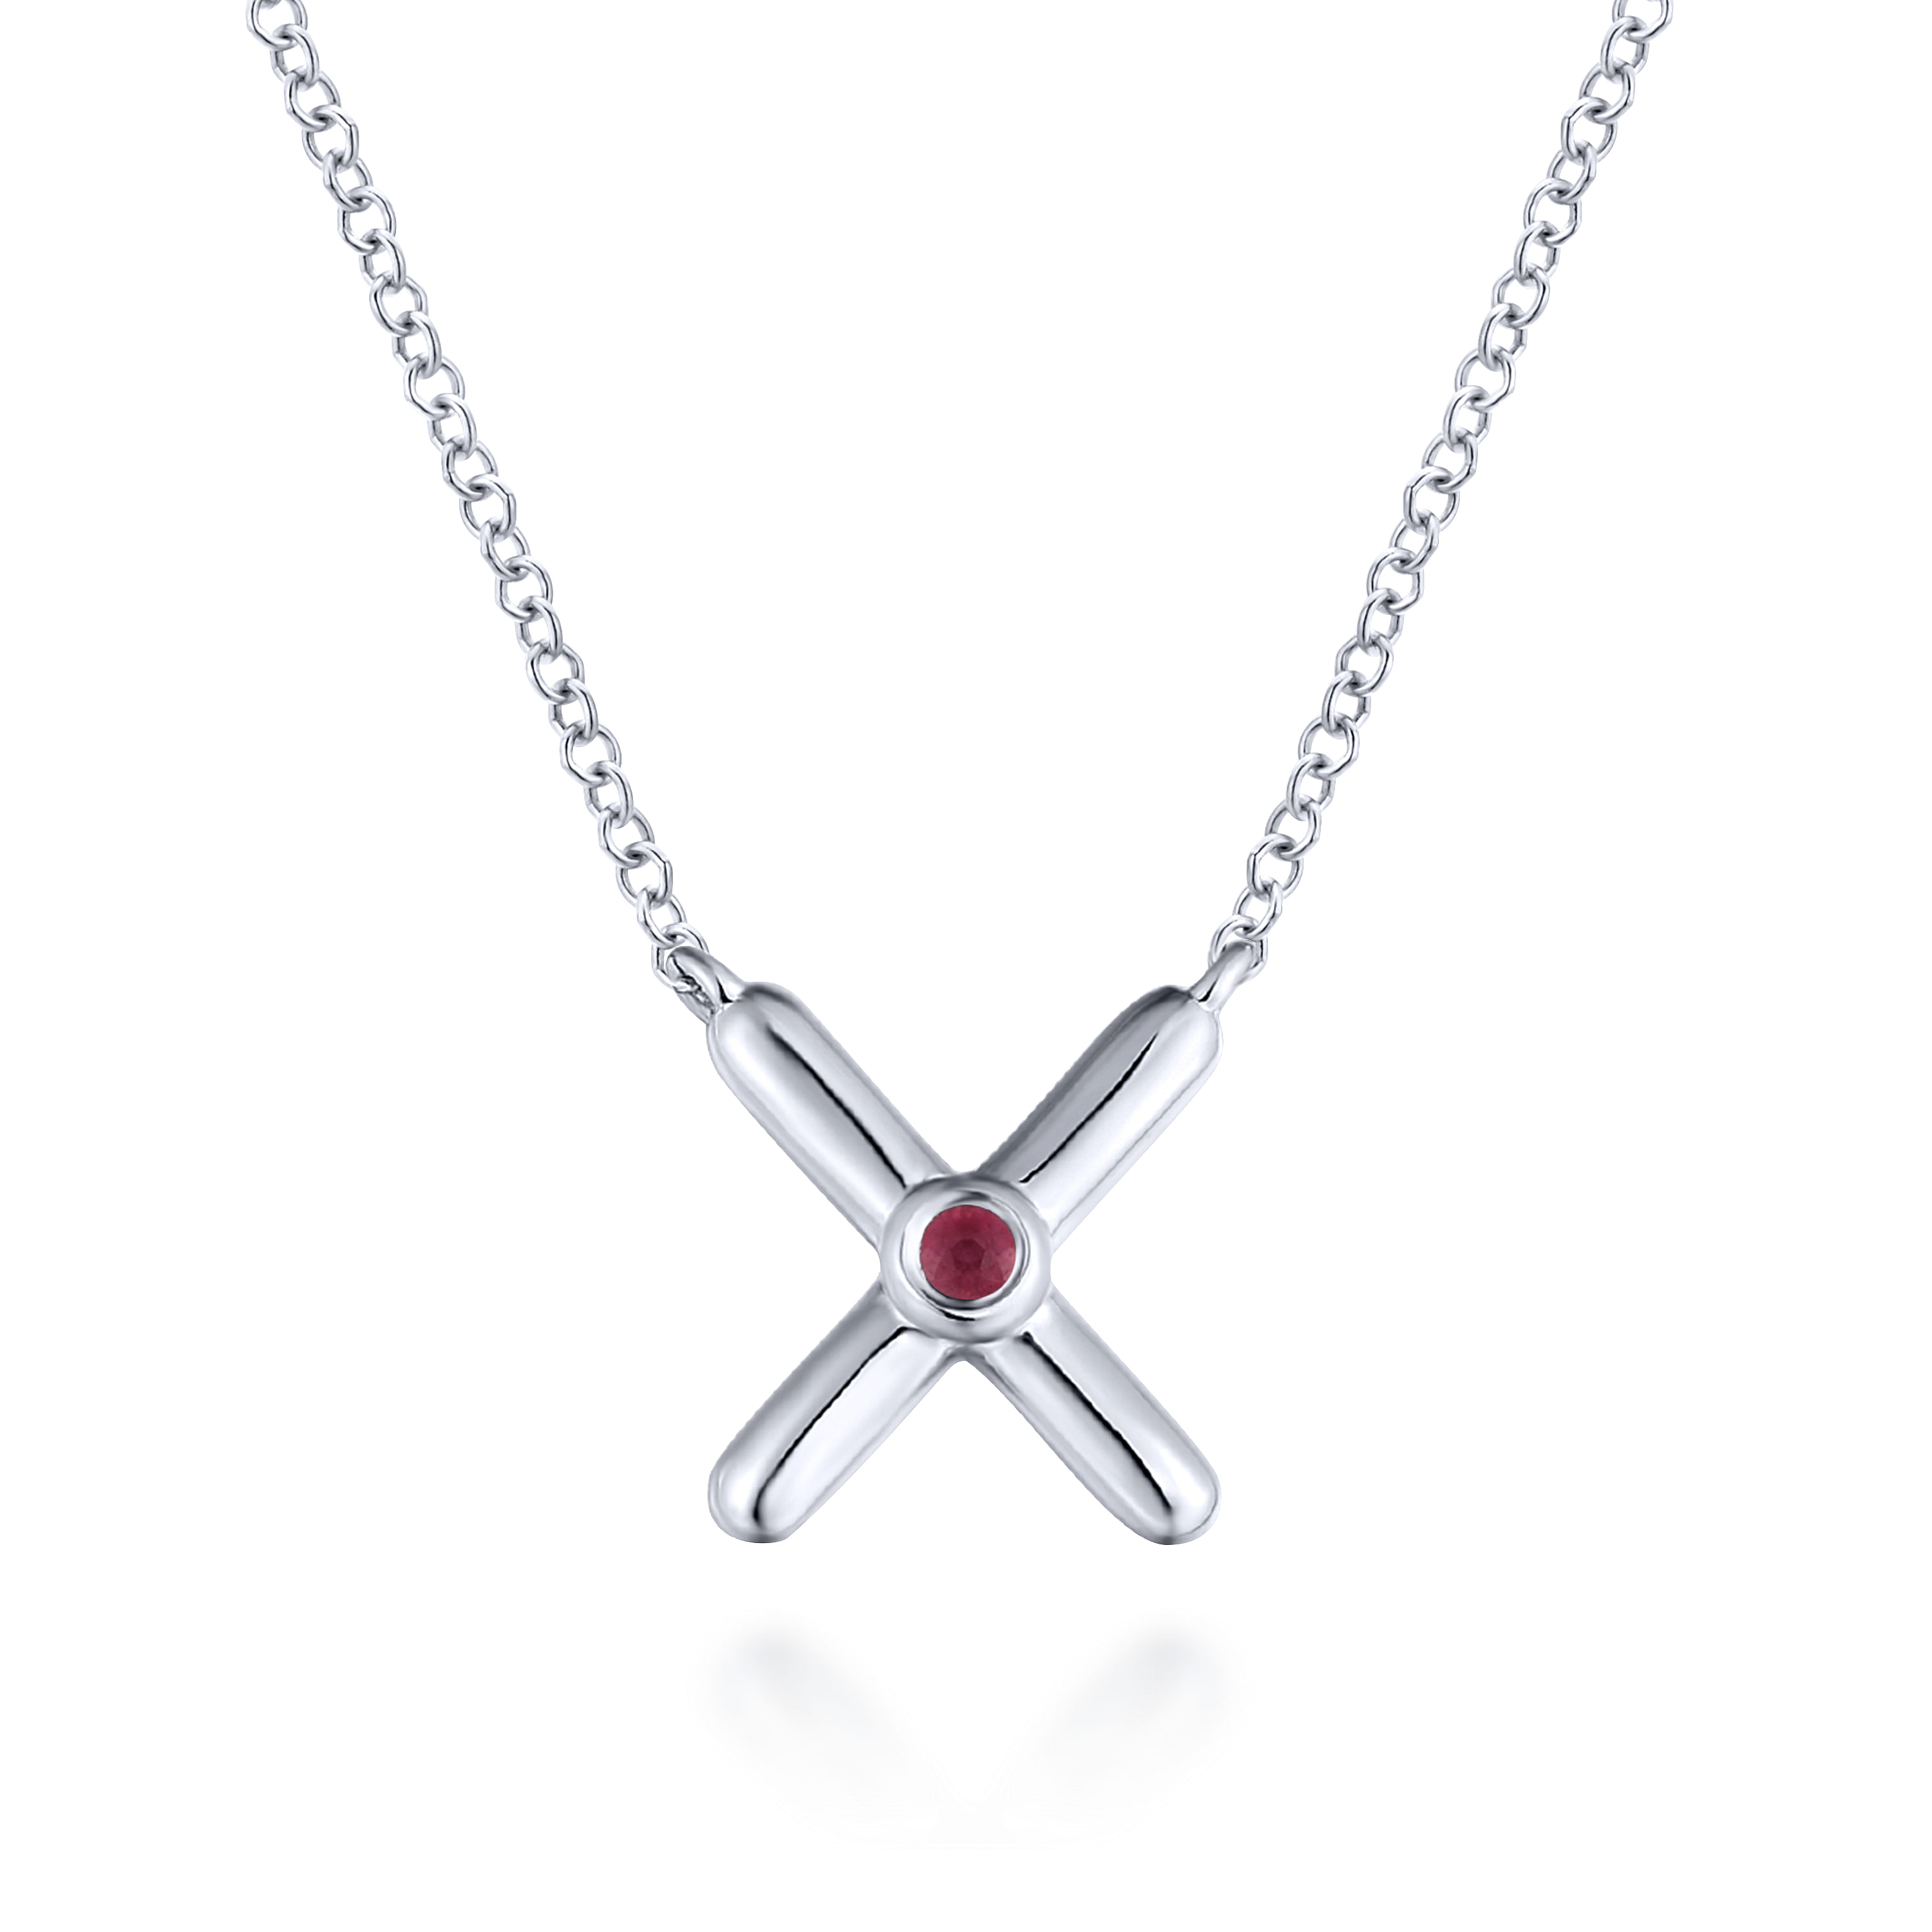 Sterling Silver X Necklace with Ruby Stone Center